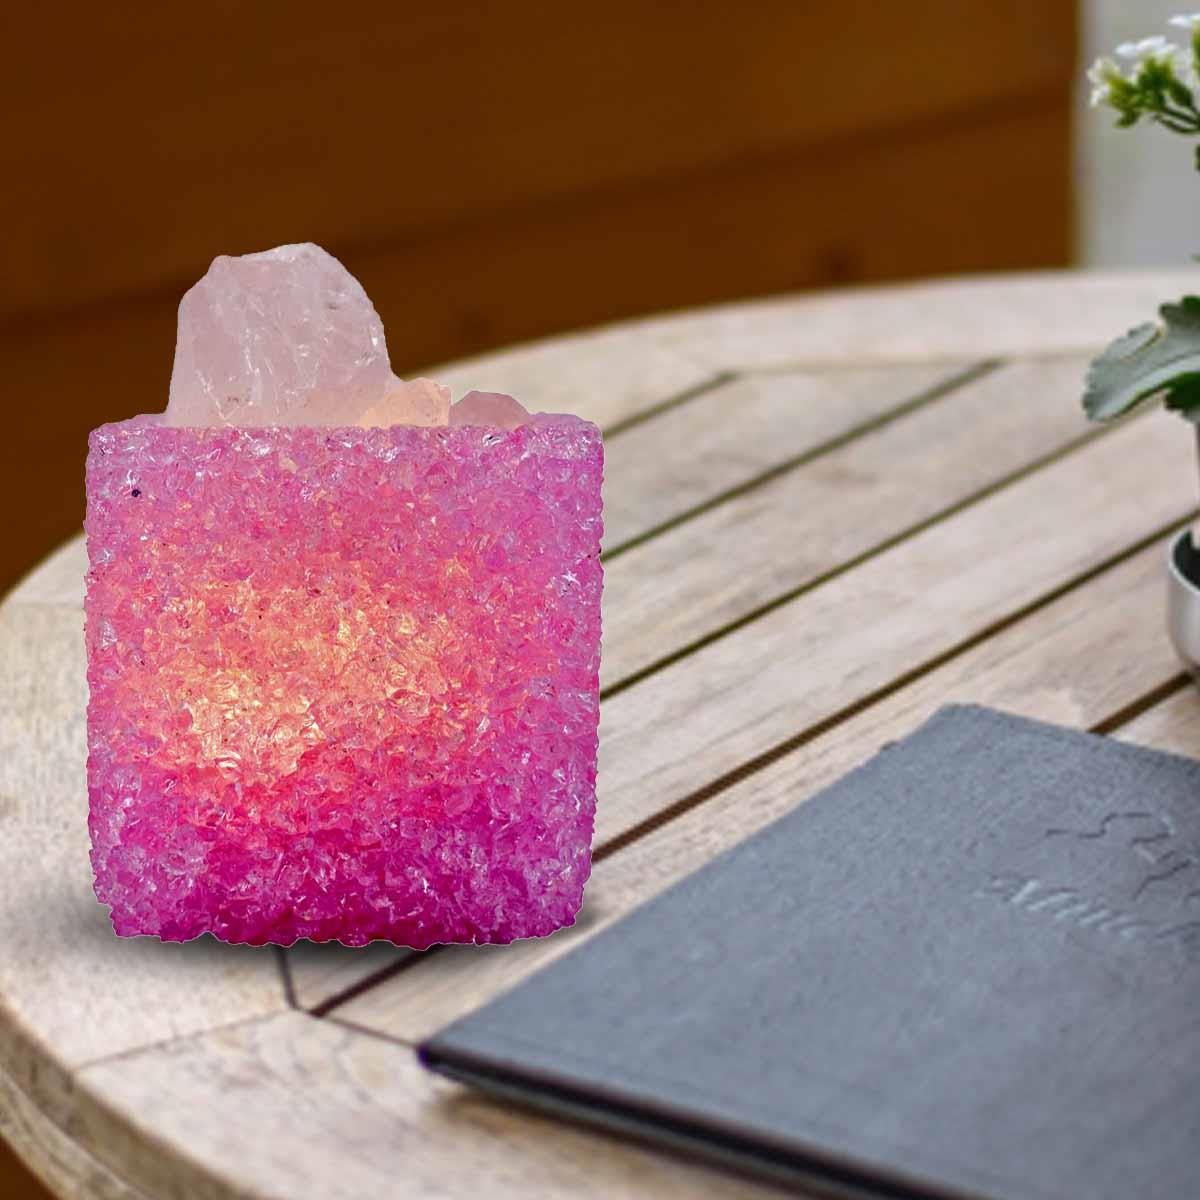 Kookee Natural Crystal Aromatherapy with Essential Oil, Electric Diffuser and LED Light Suitable for Home, Office, Spa for Claming, Soothing and Relaxing (087-5-D)